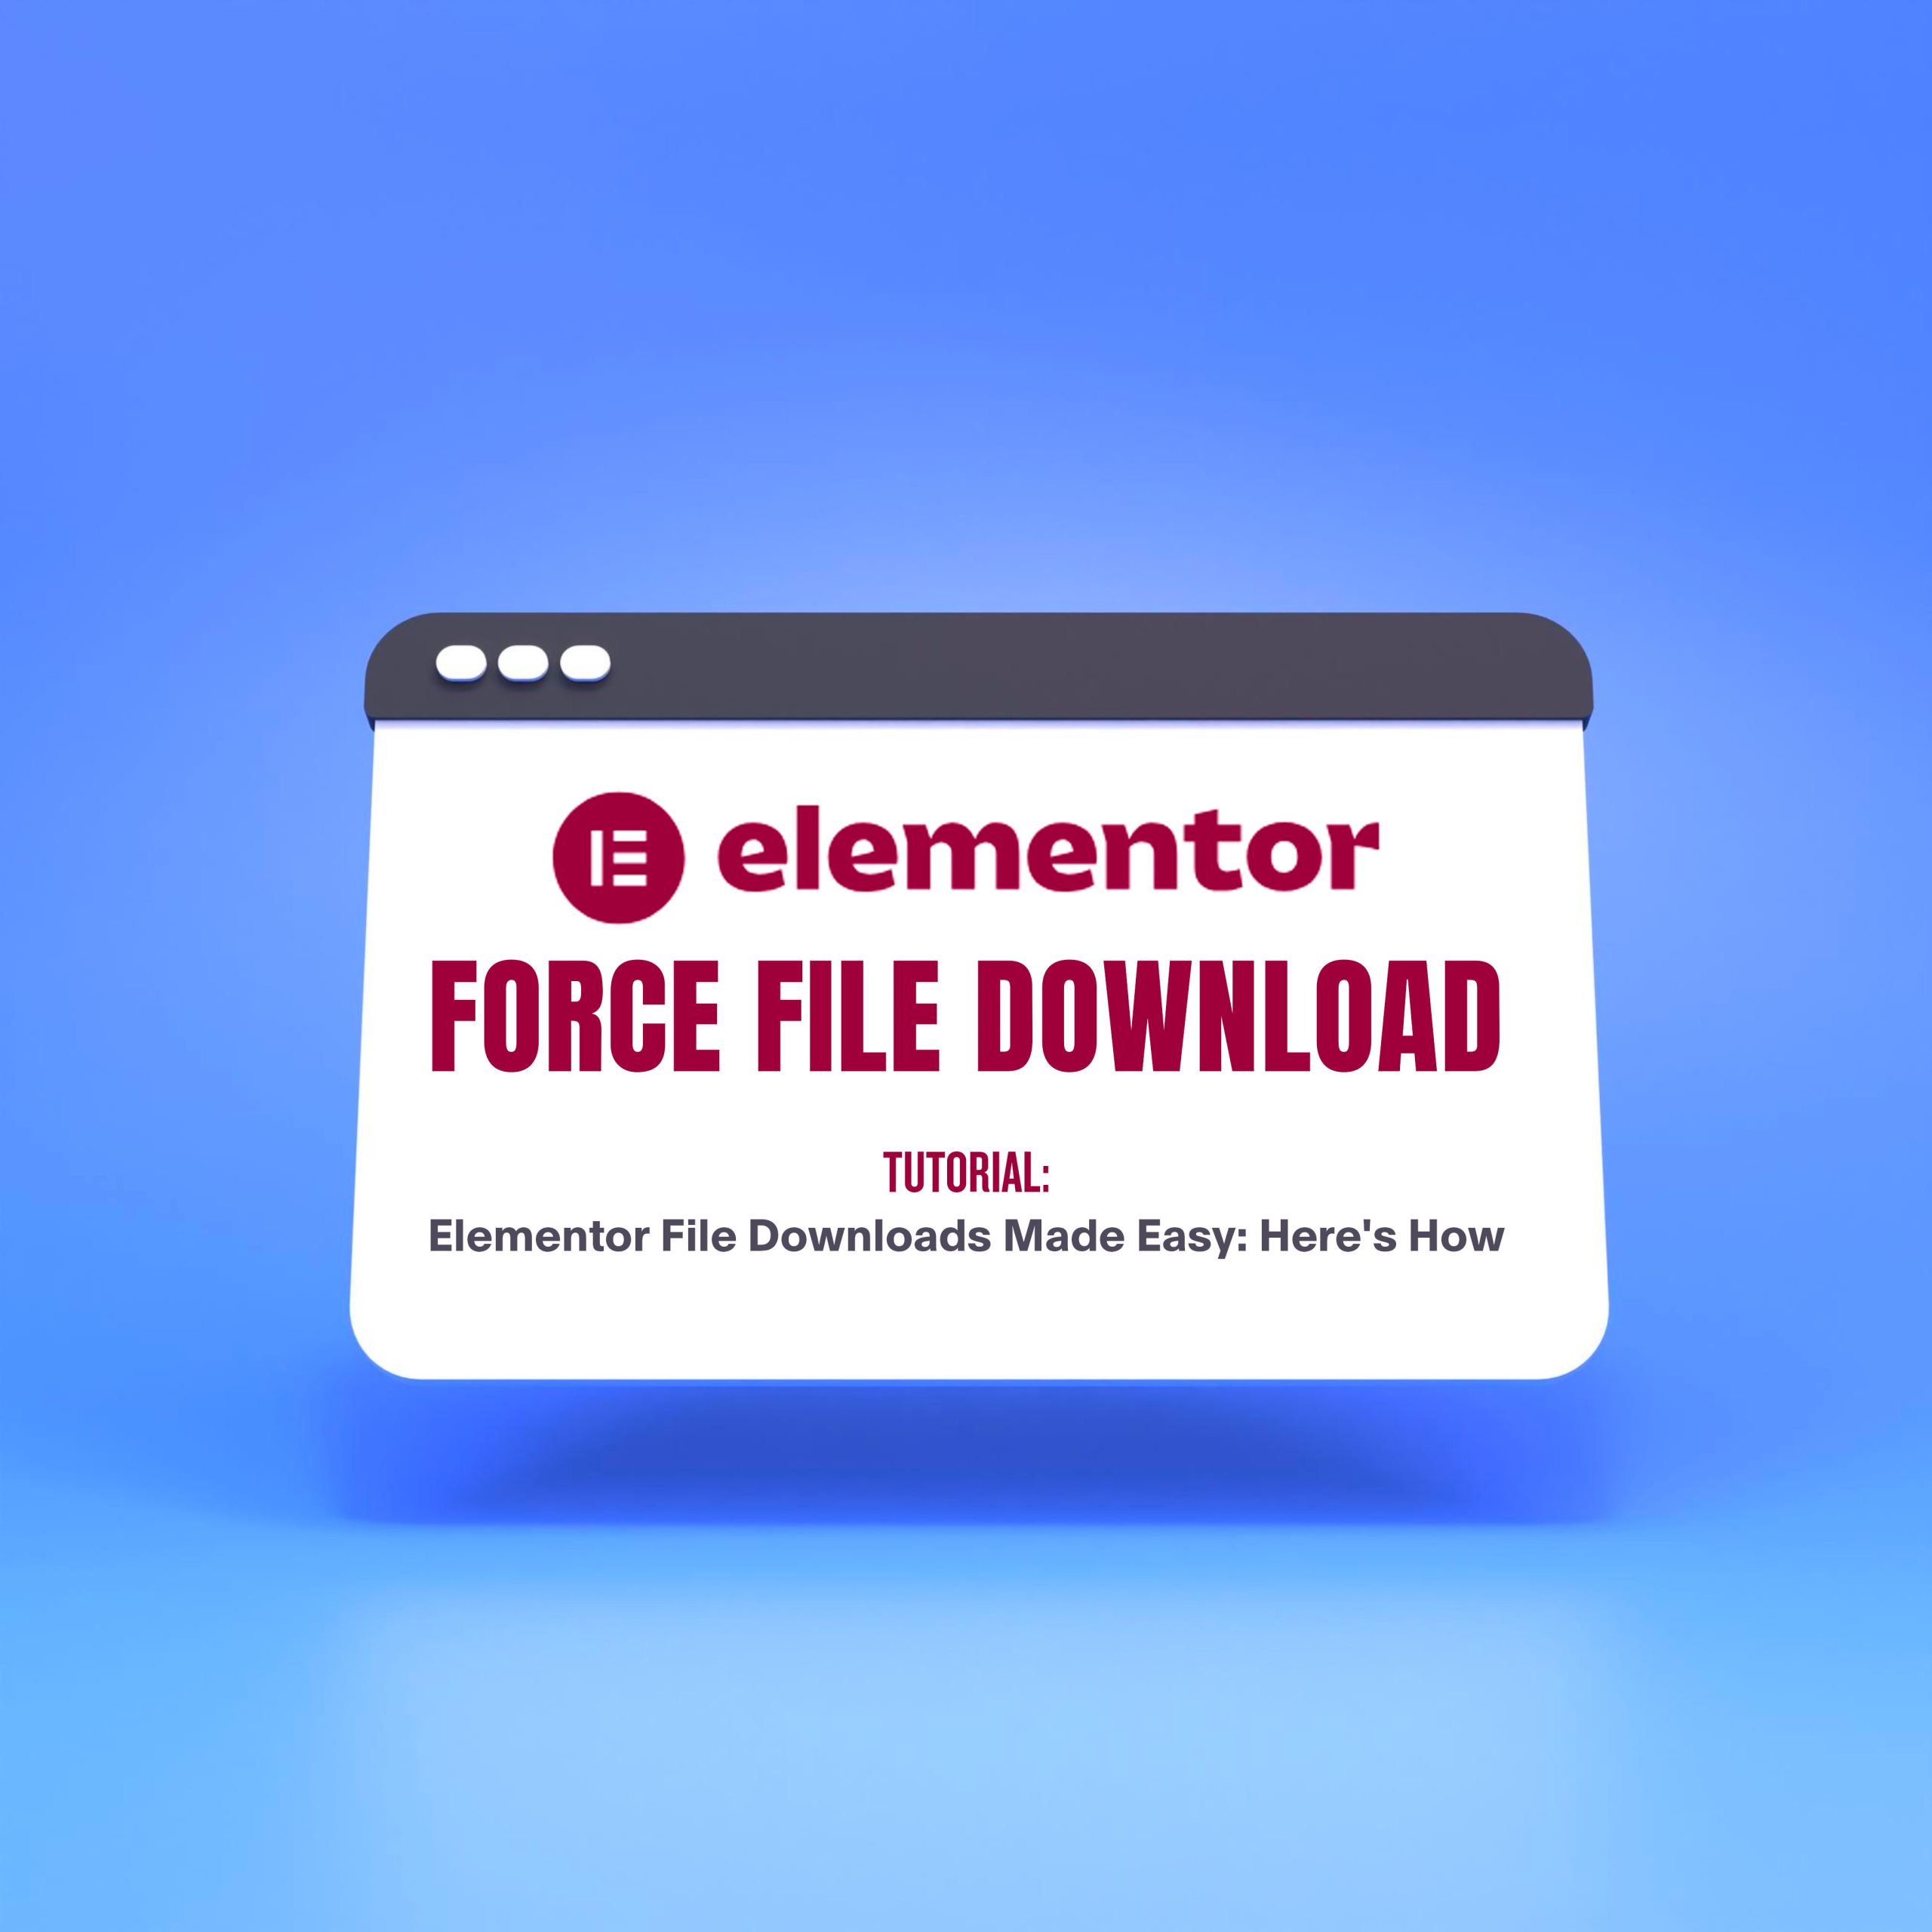 Elementor File Downloads Made Easy: Here’s How